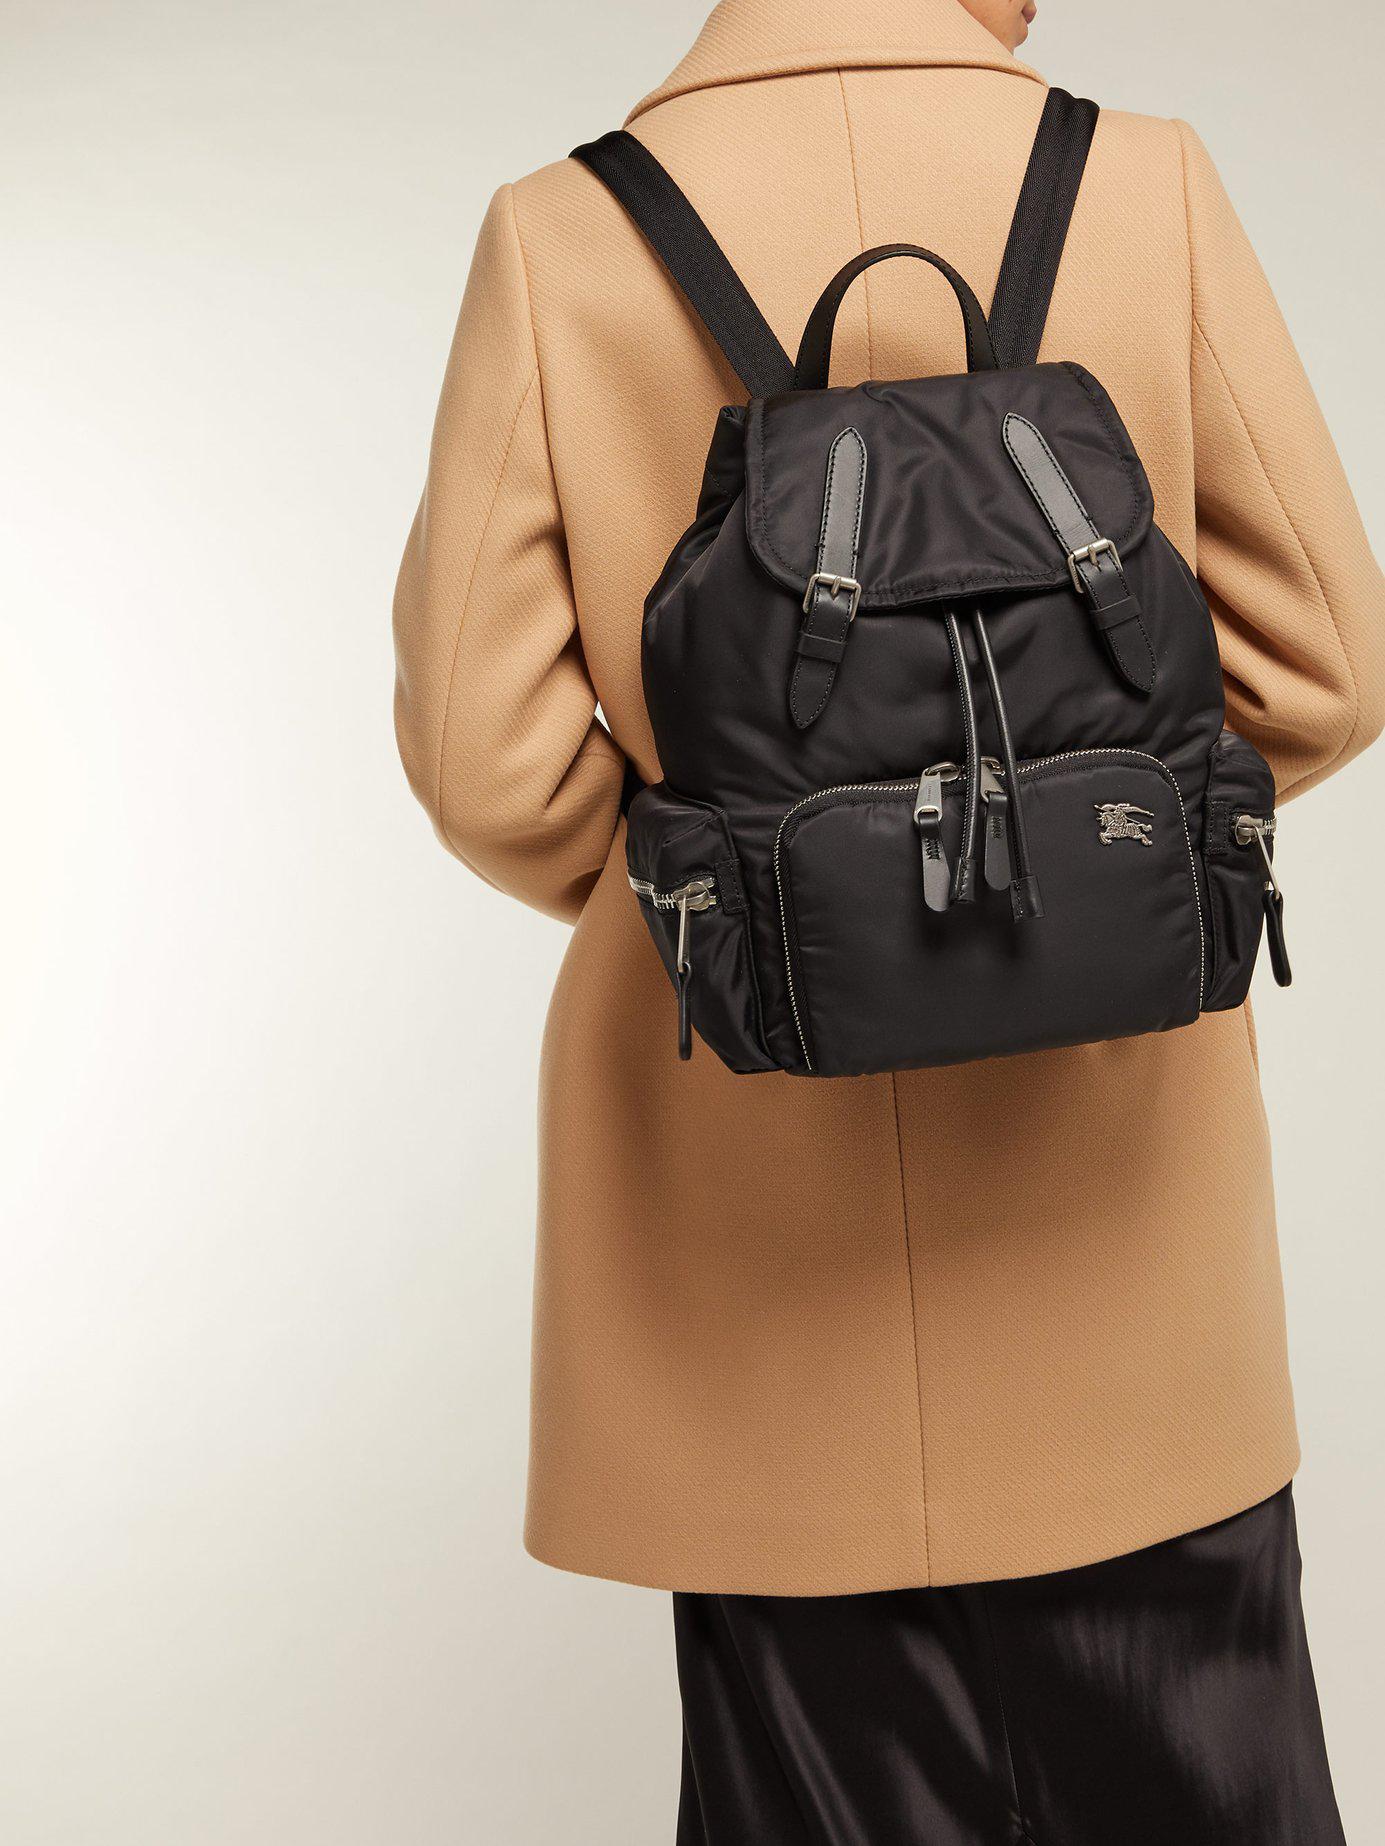 Burberry Synthetic Medium Nylon And Leather Backpack in Black - Lyst